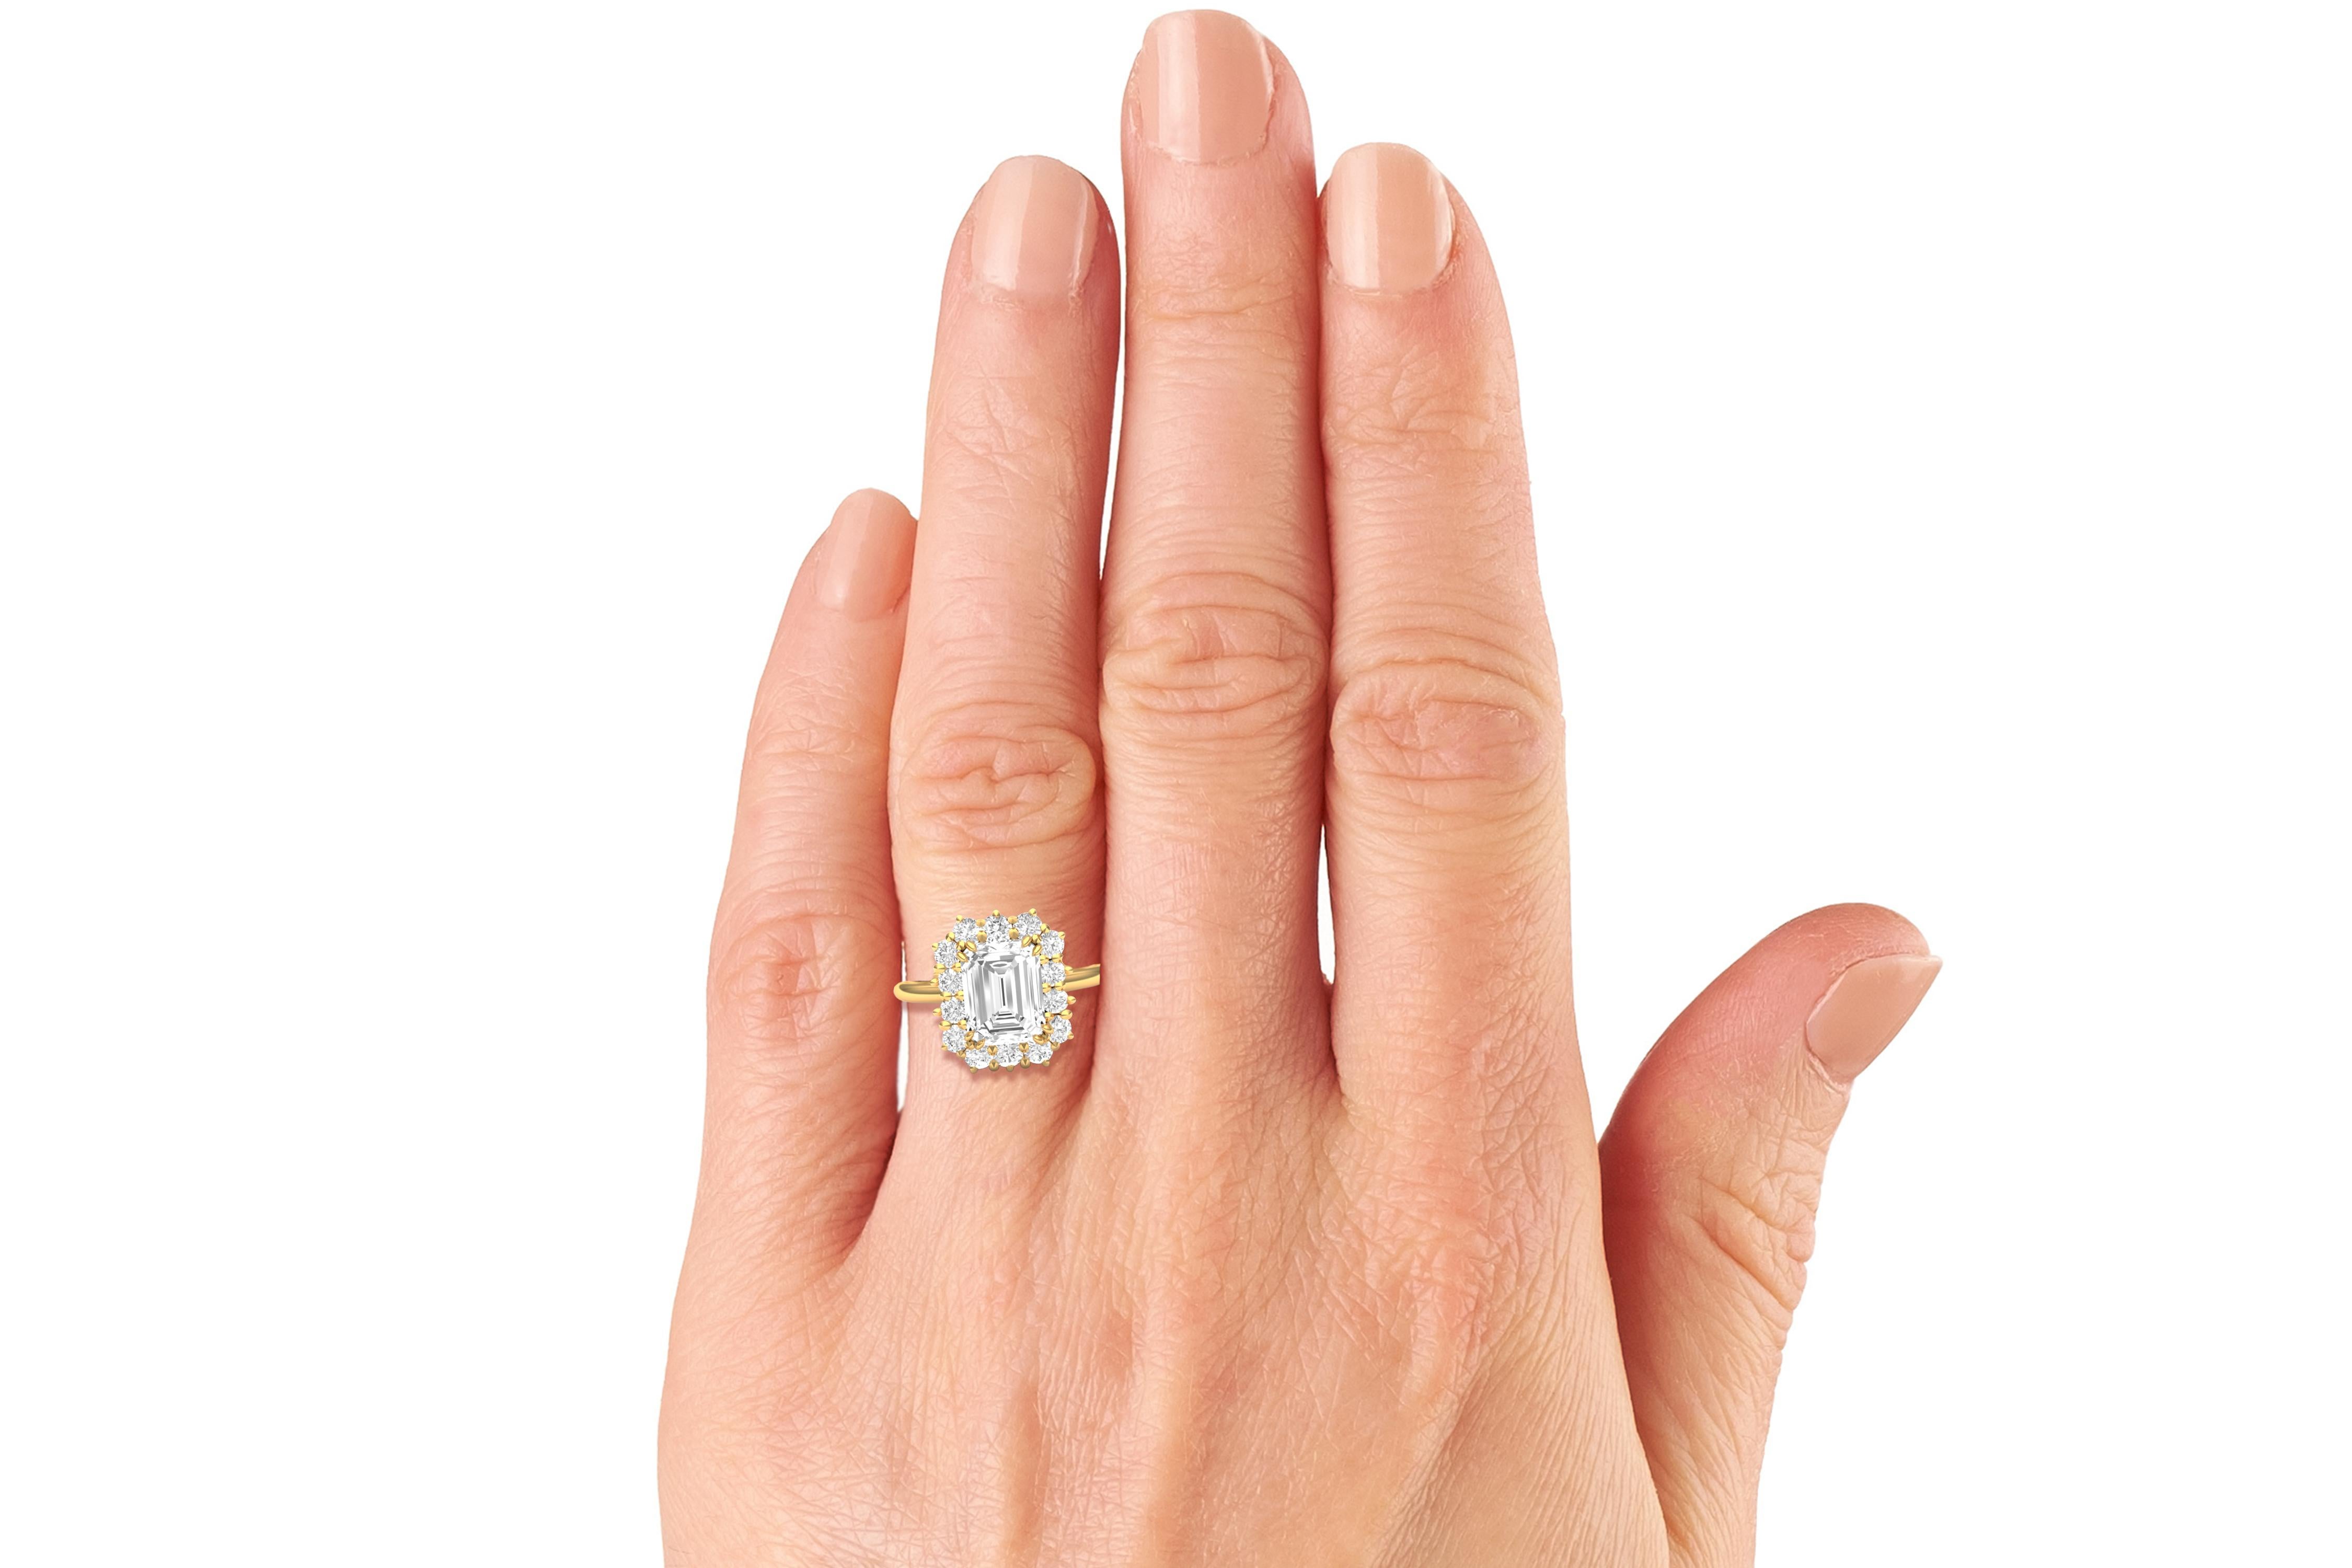 A stunning example of three prong engagement ring perfection.  The center stone is a GIA Certified 2 carat Emerald Cut K-VS2.  The center stone is accented by 3mm .10 carat each round brilliant diamonds which have a color and clarity of the center